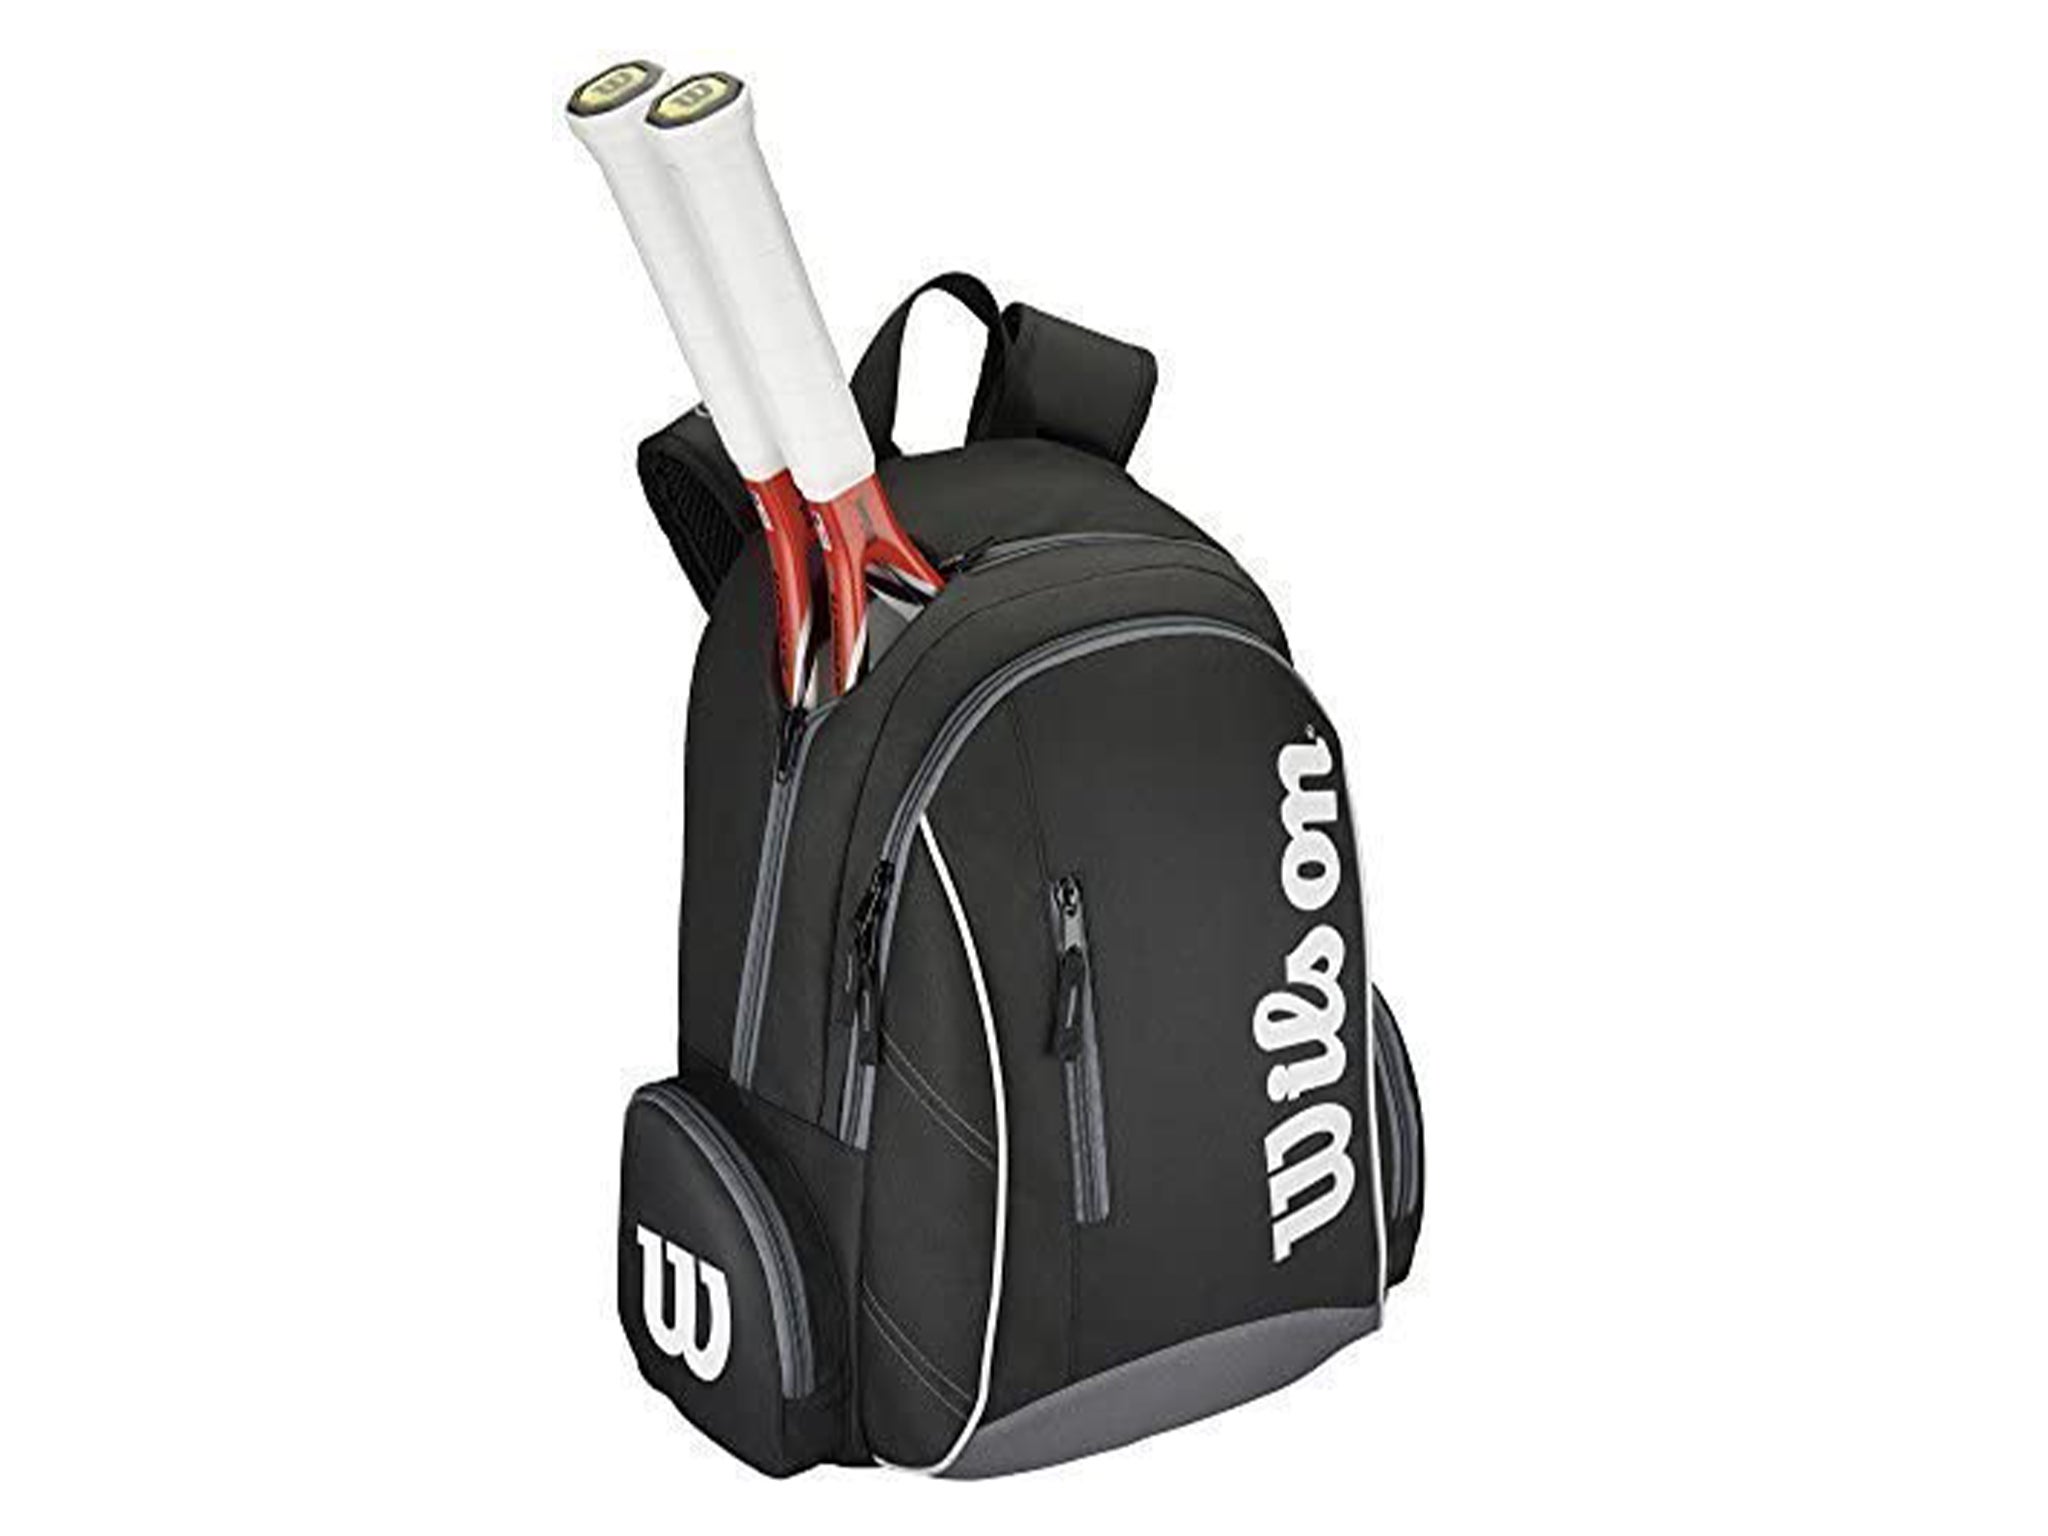 Keep all your tennis gear safe and dry with a kit bag